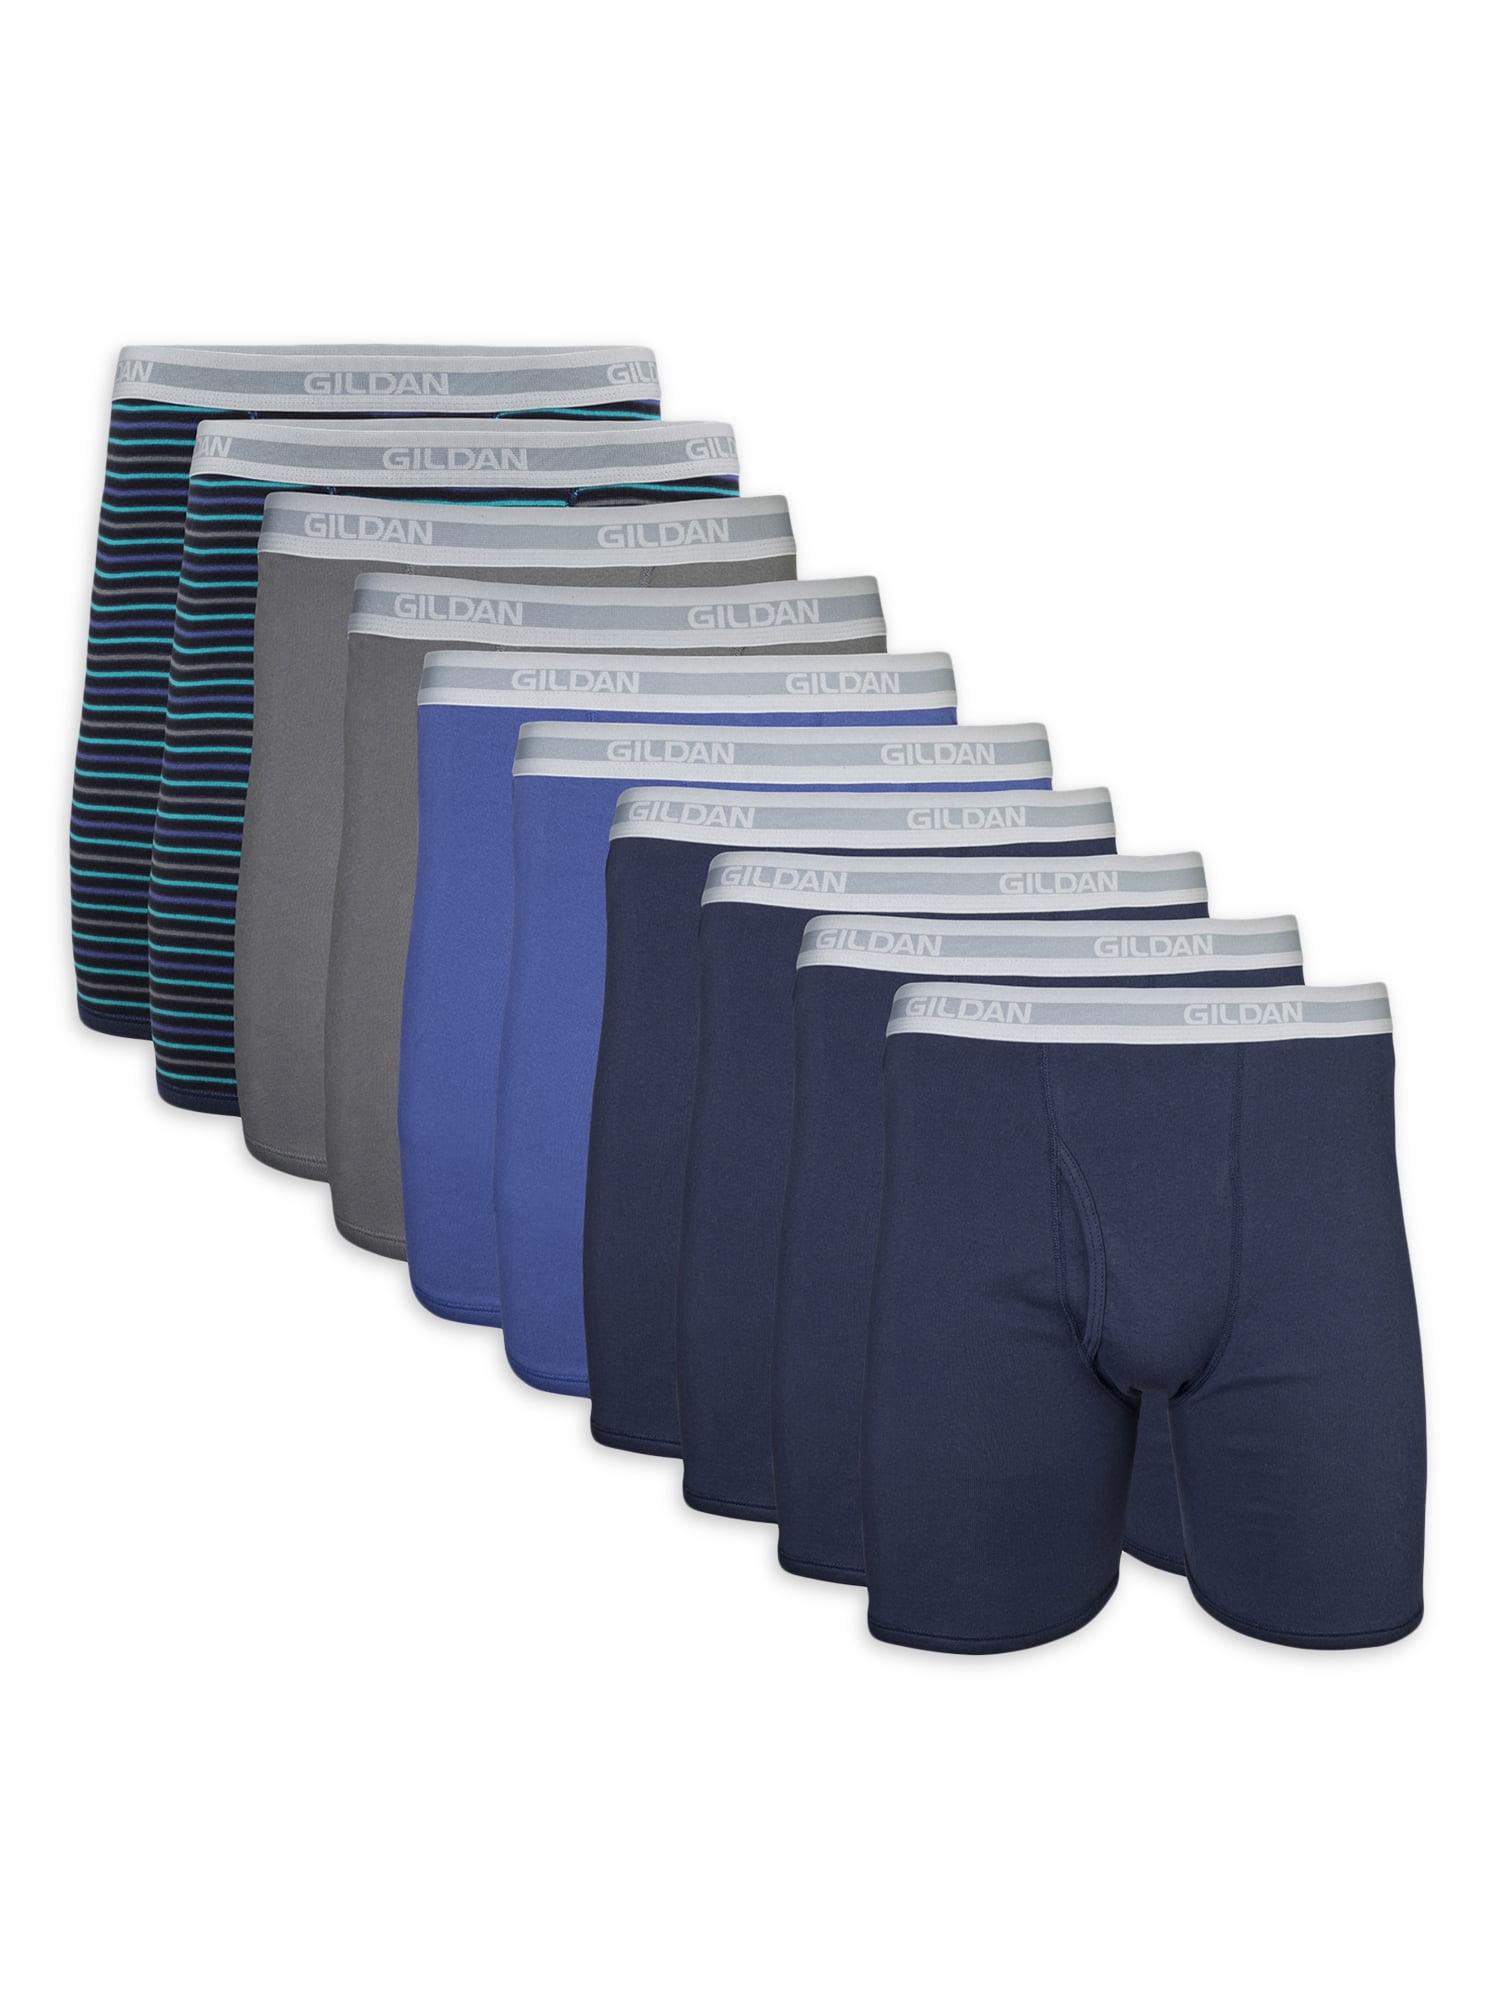 Gildan Adult Mens Boxer Briefs With Waistband, 10-Pack, Sizes S-2XL, 6  Inseam 